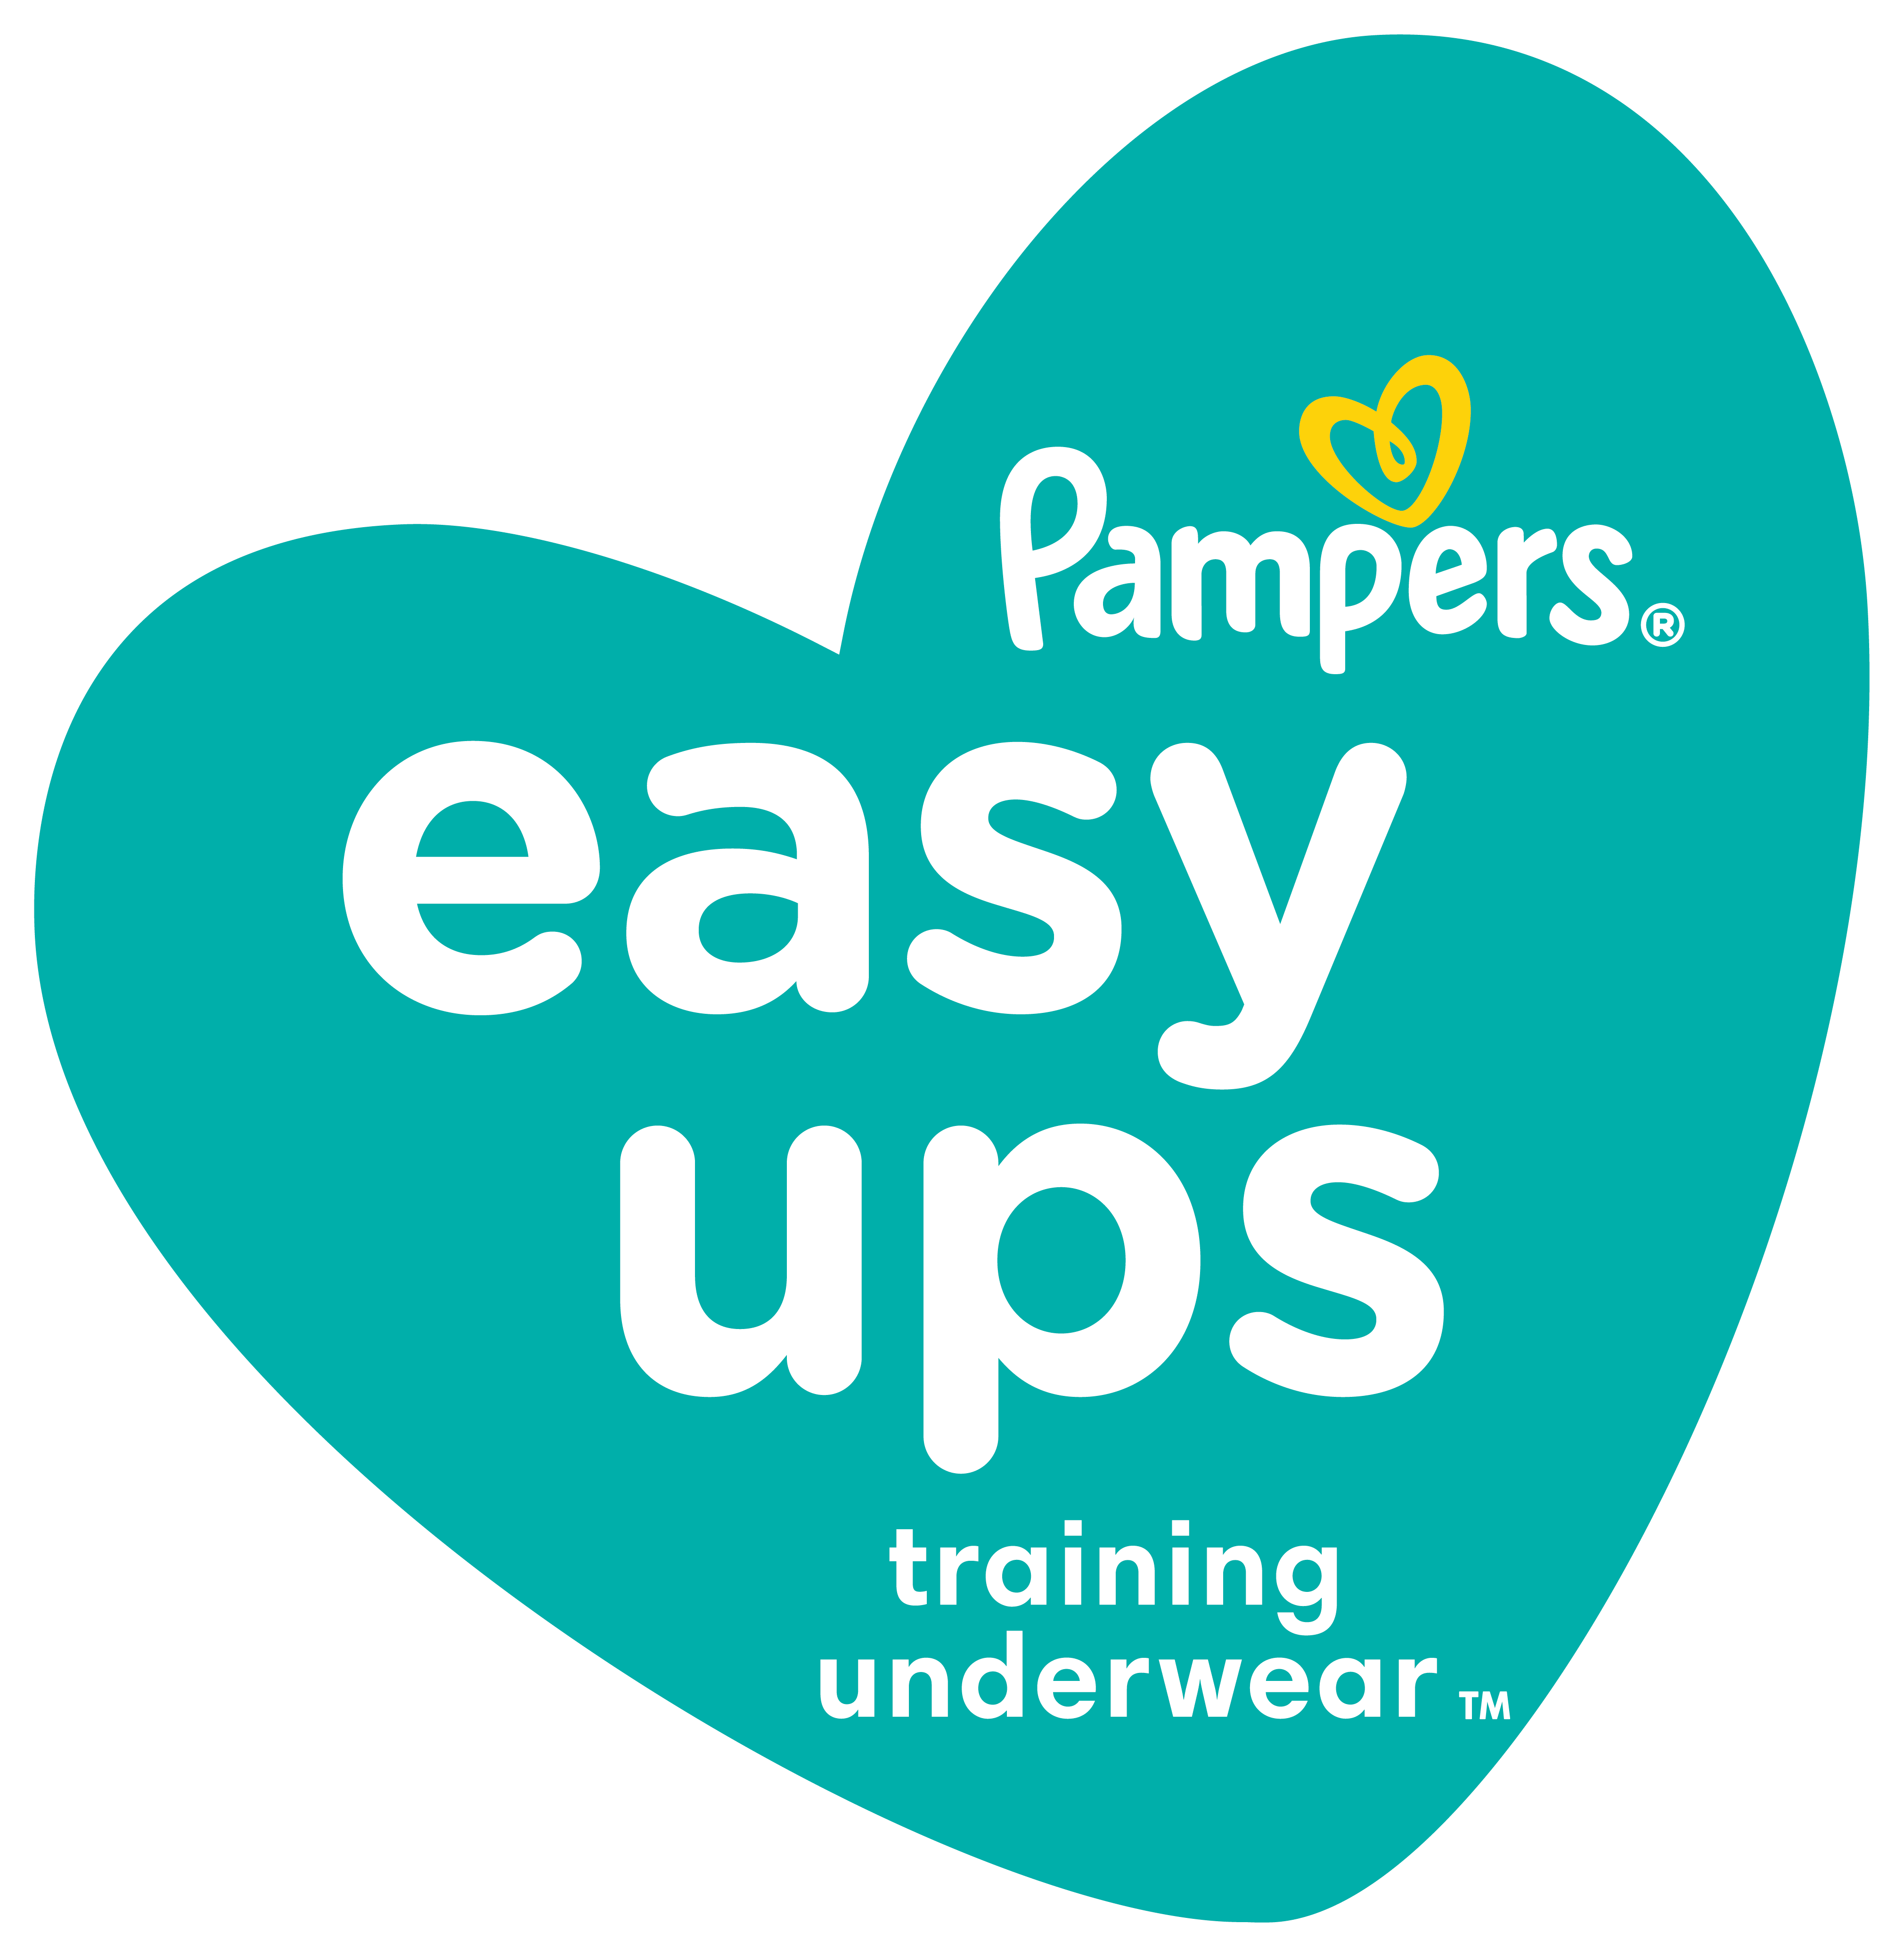 Pampers - Pampers Easy Ups: The easiest way to underwear